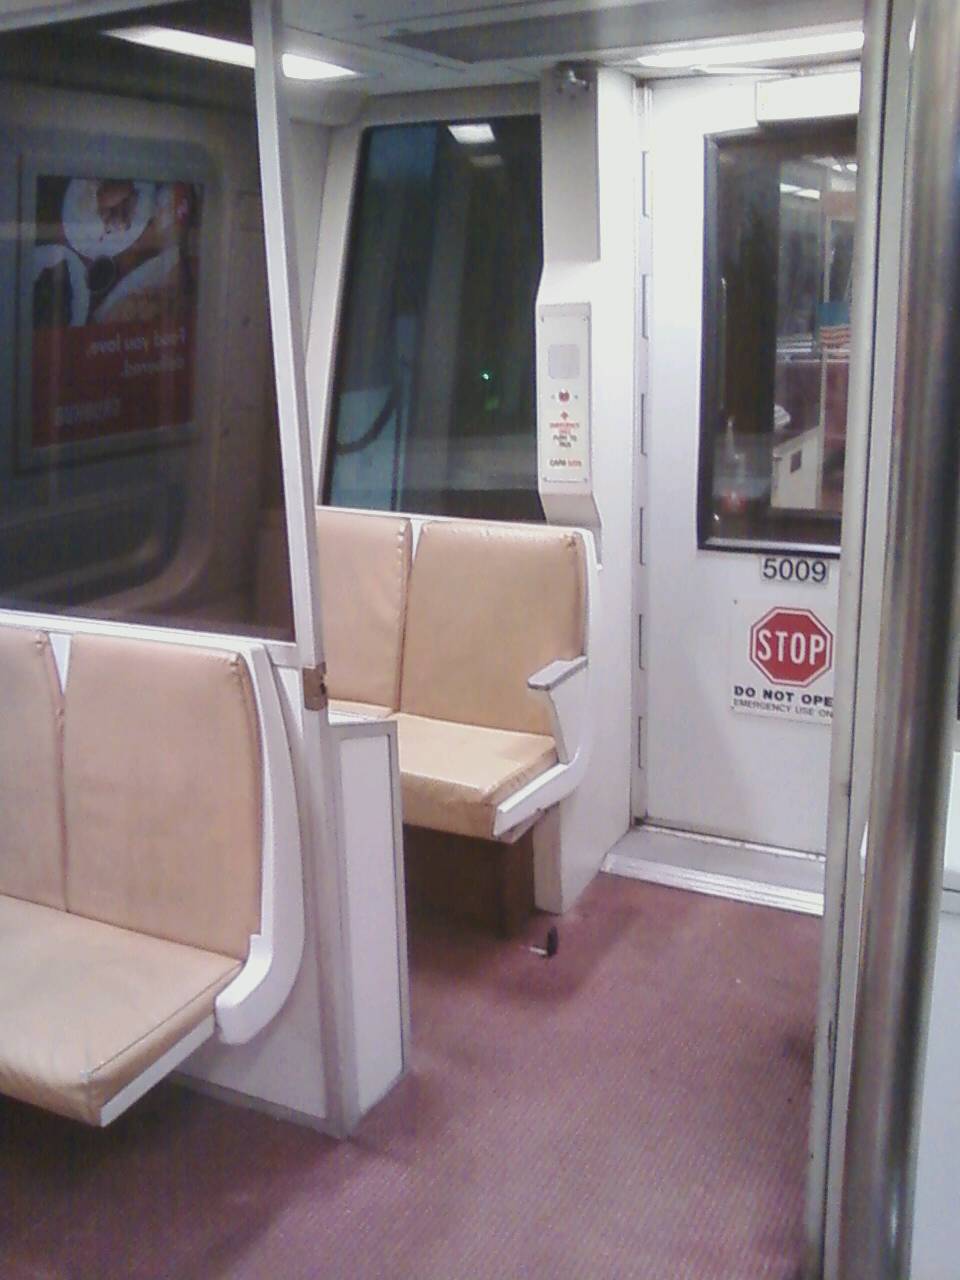 WMATA/DC Metro 'private section' of a 5000-series car (half of 
motorman's cab which provides seating when not in use to operate the 
train), offering a very private ride. As in car 1183 above, the carpeting 
in this 5000 series car is relatively new and makes the ride even 
quieter. For further details, please visit www.wirelessnotes.org.